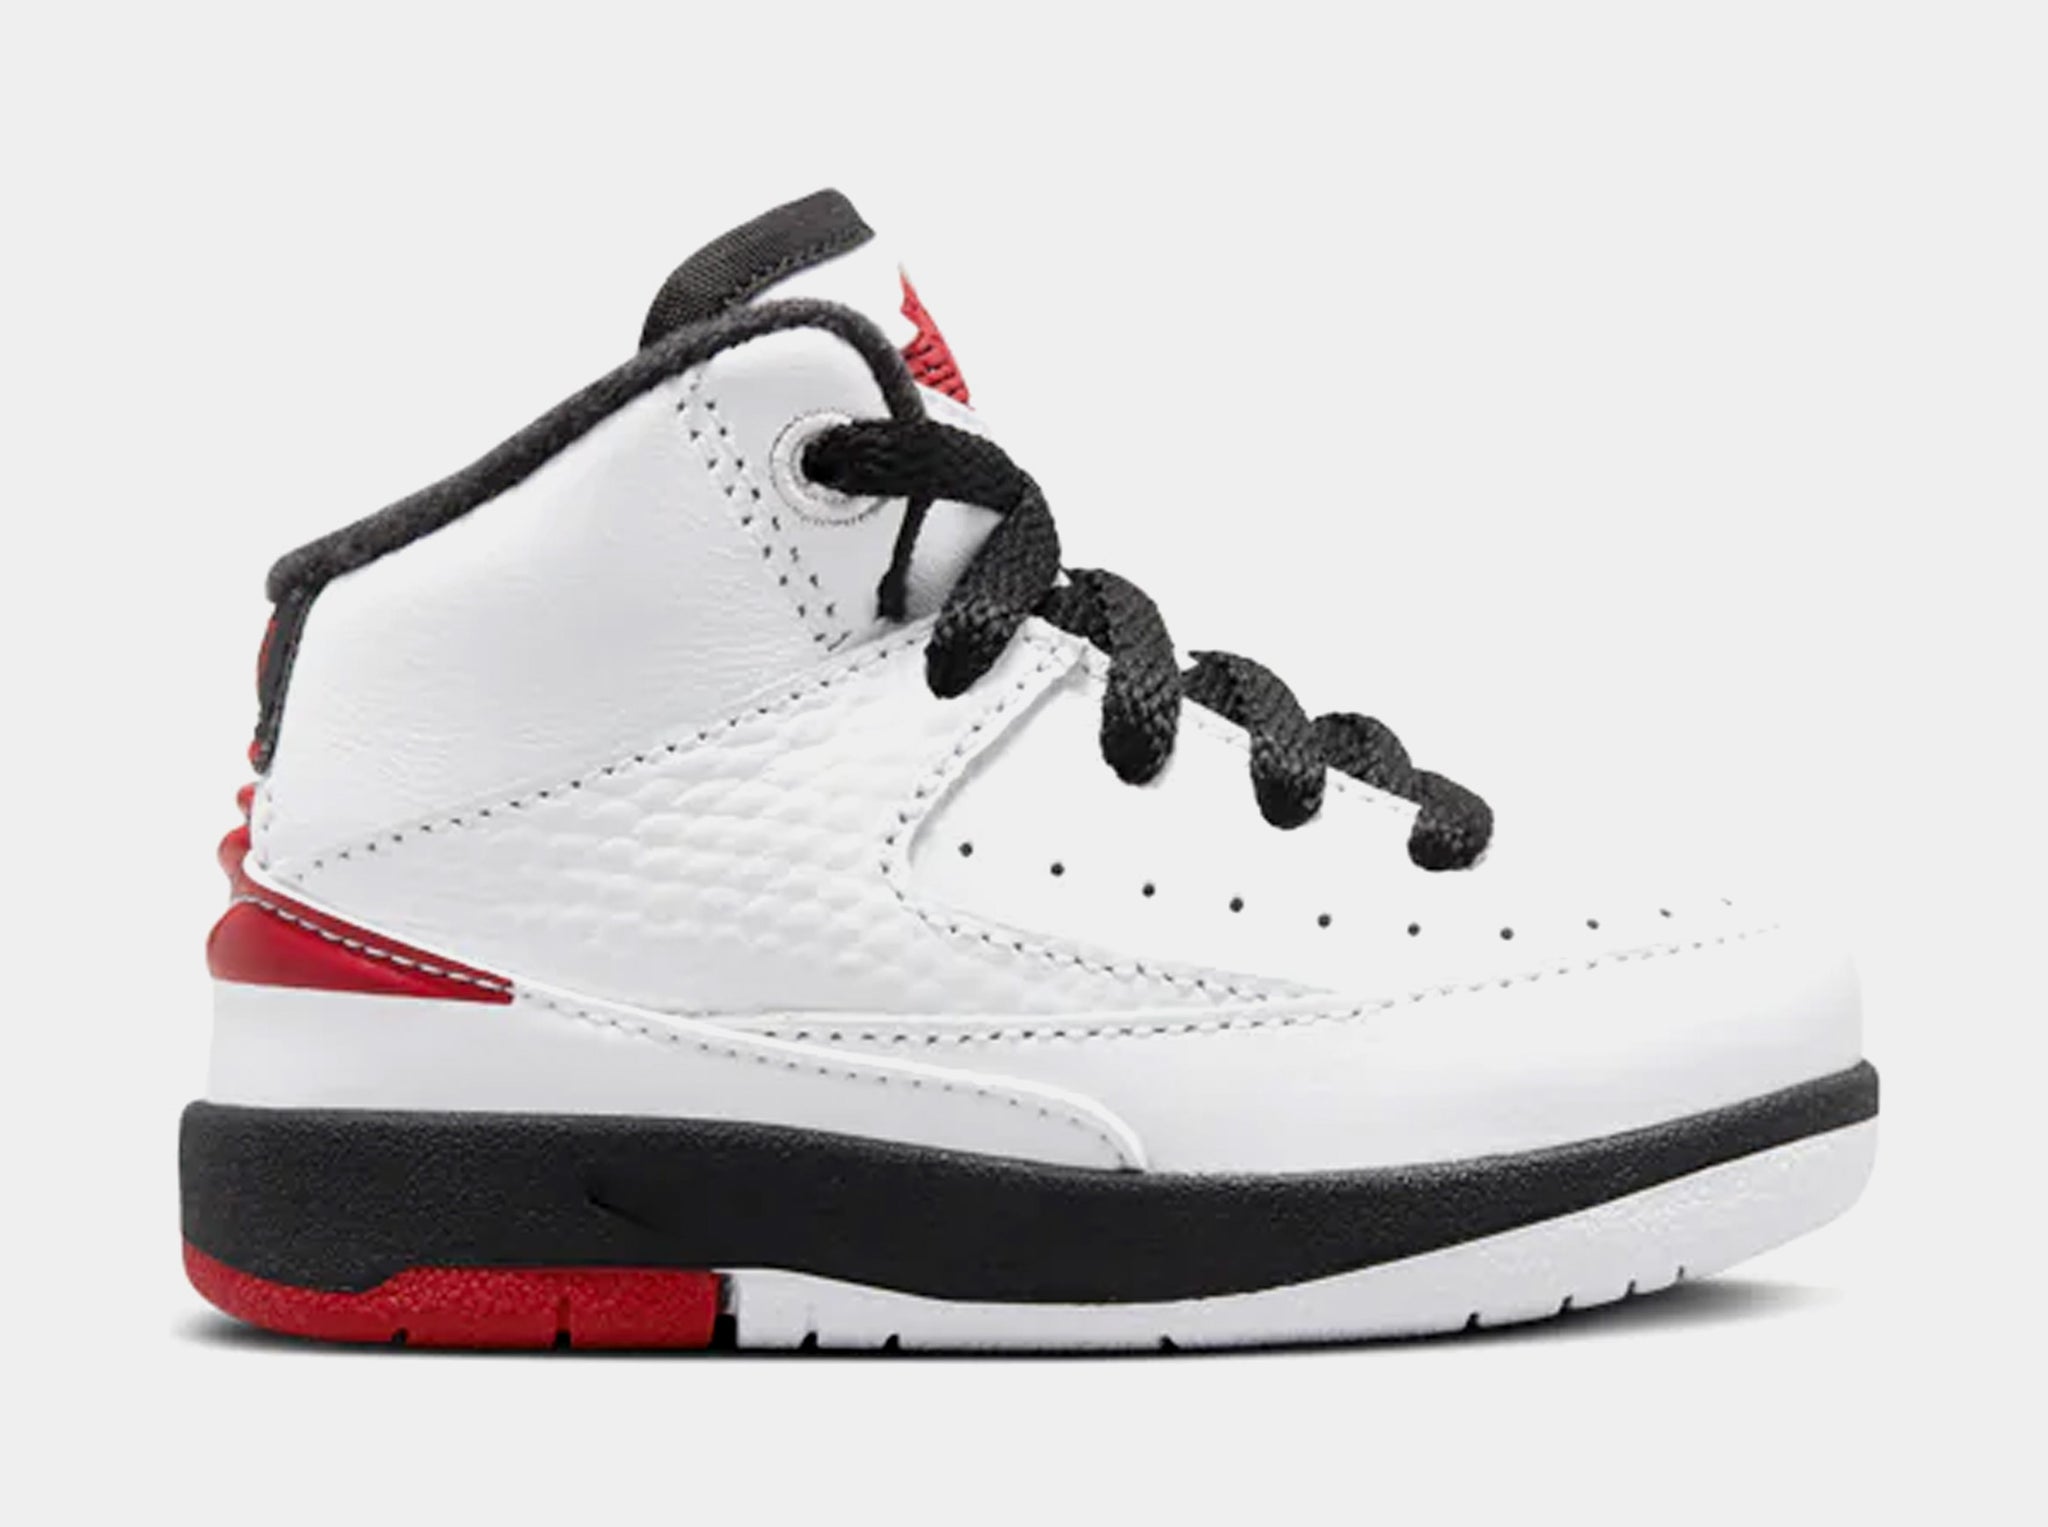 Air Jordan 2 Retro Chicago Infant Toddler Lifestyle Shoes (White/Red)